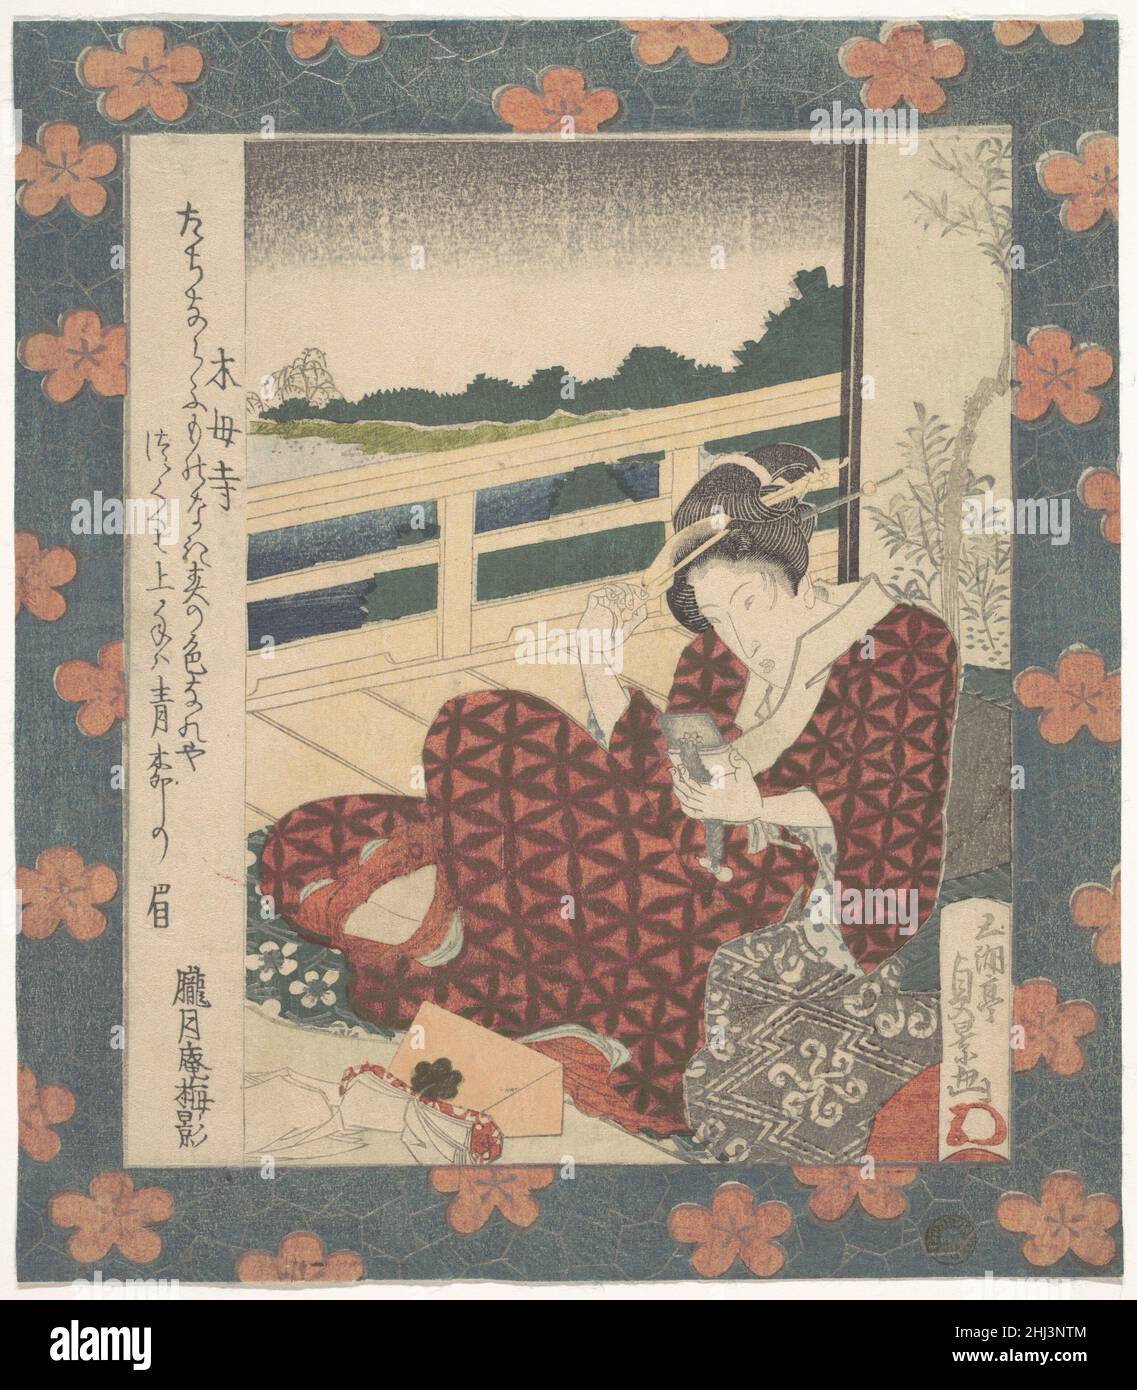 Beauty Looking at Her Image in a Mirror ca. 1840 Utagawa Sadakage Japanese Sadakage, a pupil of Utagawa Kunisada, worked first in Edo and later in Osaka. He specialized in the theme of graceful women. Here, a woman is readjusting her coiffure after meeting a customer. The suggestive spring poem by Rōgatsuan Baiei in the long, rectangular label at the left is entitled 'Mokuboji,' after a temple whose grounds are famous both for the grave of the abducted child Umewakamaru from the Noh play Sumidagawa and for their cherry blossoms and willow trees.. Beauty Looking at Her Image in a Mirror  54423 Stock Photo